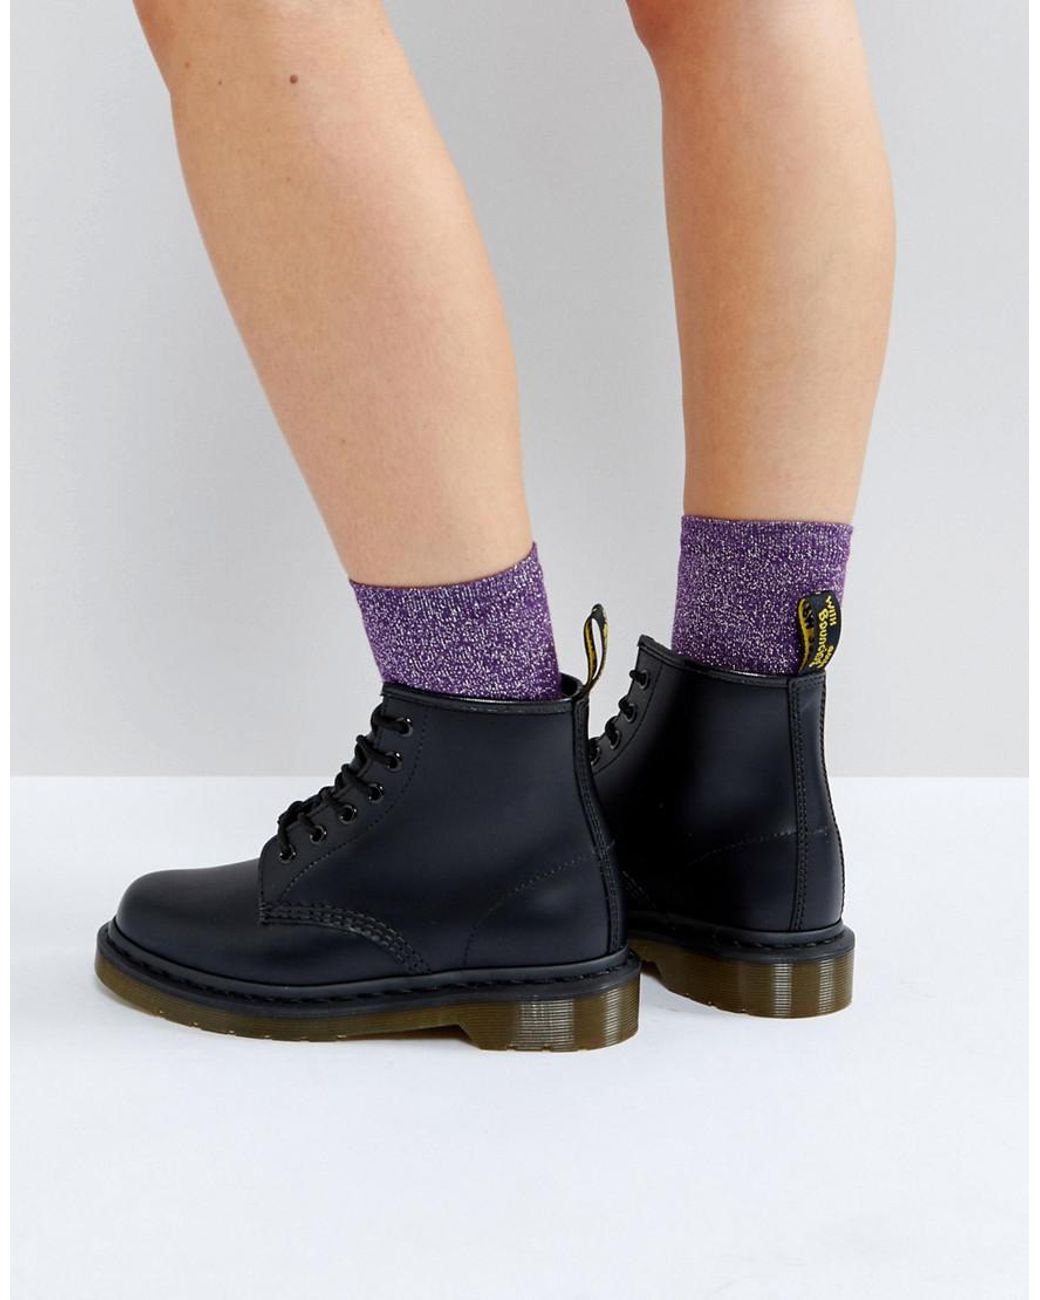 Dr. Martens 101 Smooth Boots in Black | Lyst